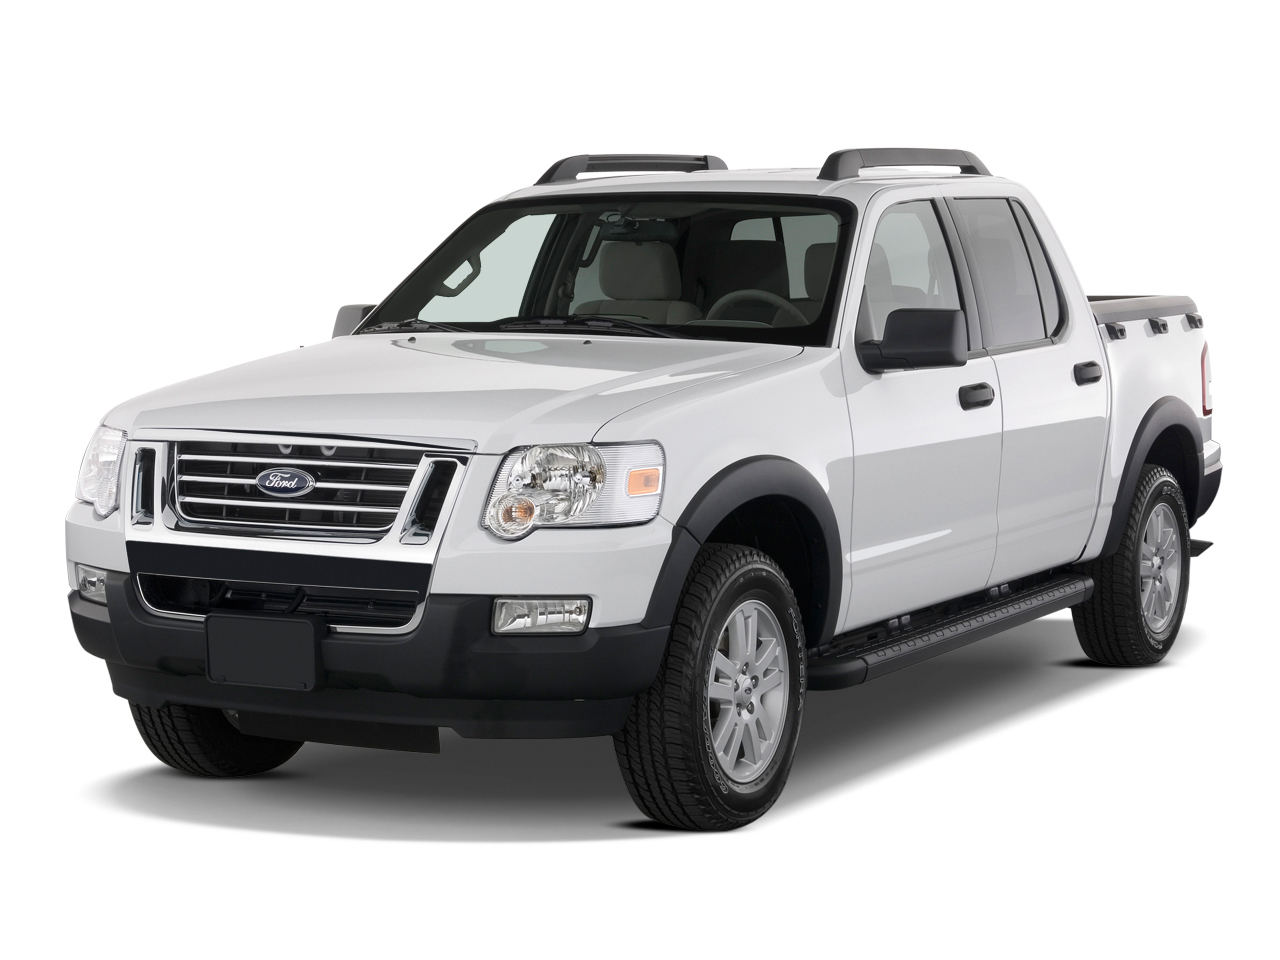 2010 Ford Explorer Review Ratings Specs Prices And Photos